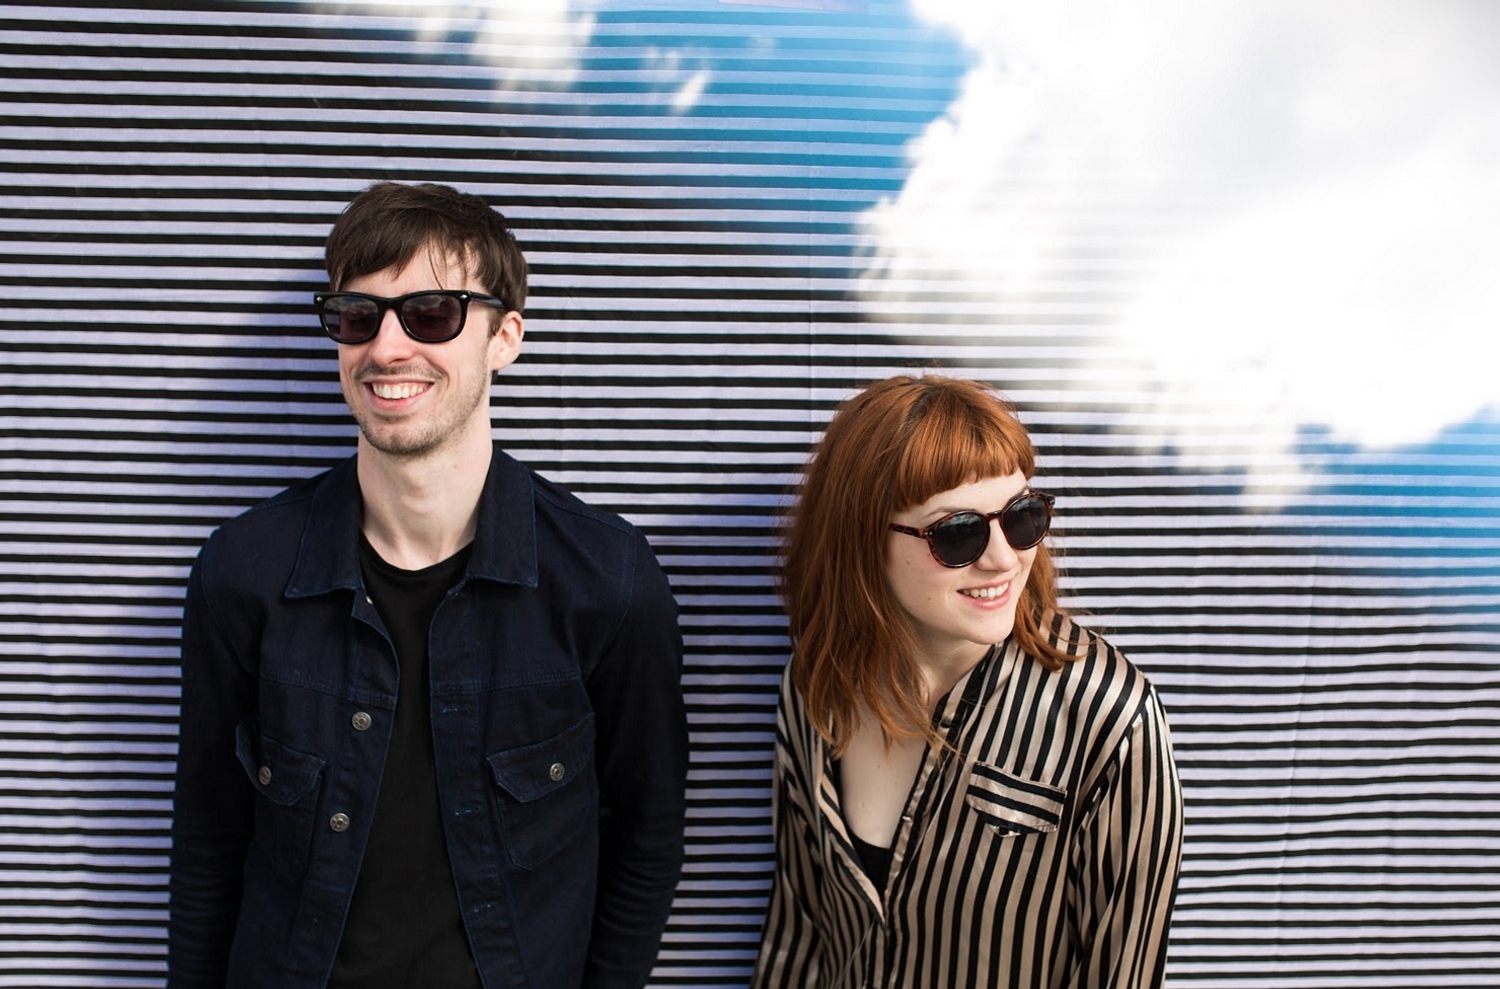 ESTRONS: "When my life’s going alright, the songs are rubbish!”